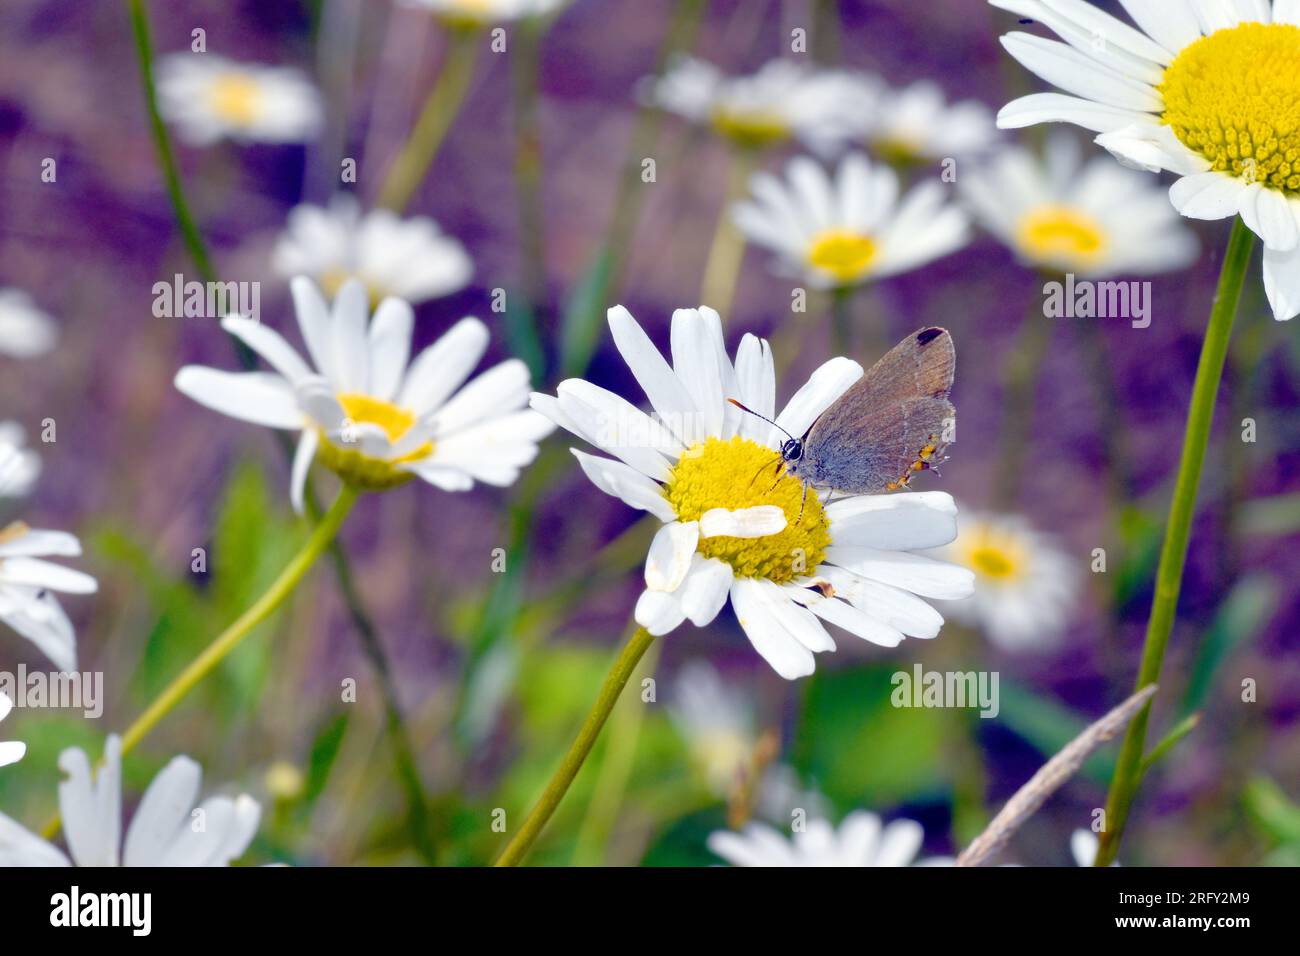 A small butterfly feeds on the flowers of a daisy. Stock Photo